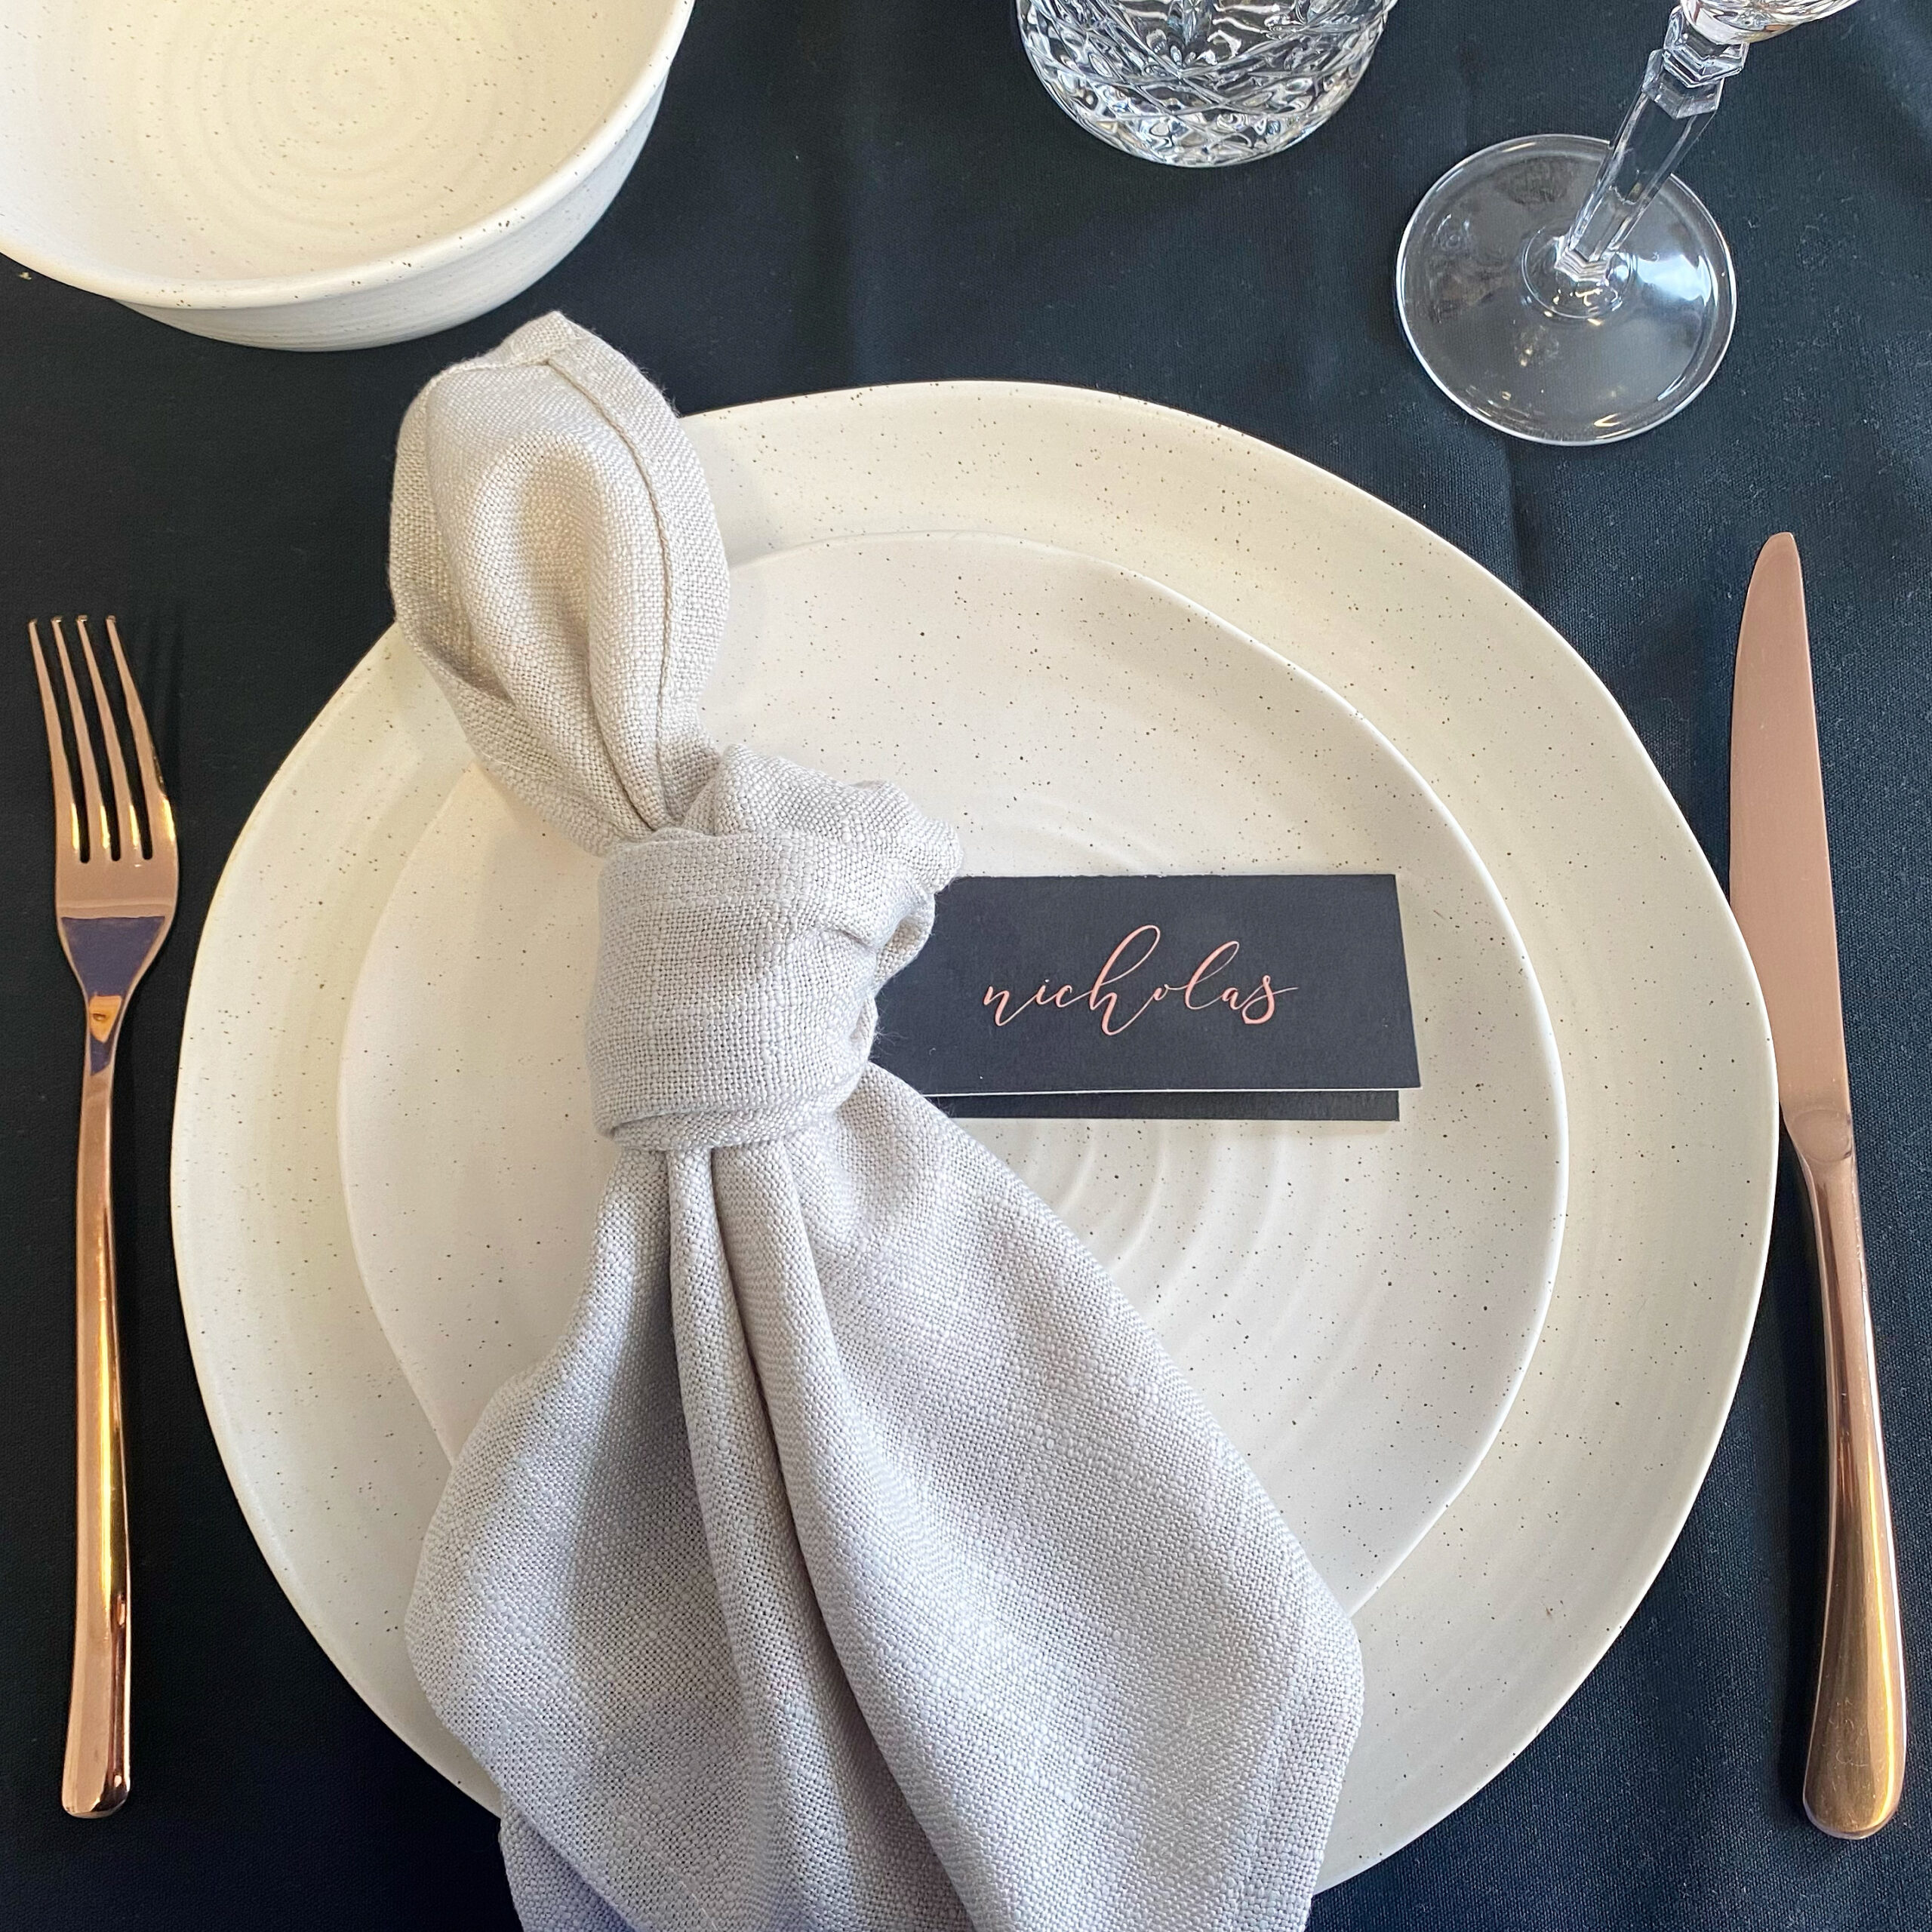 Calico-plates-rose-gold-cutlery-beige-linen-napkins-albany-event-hire